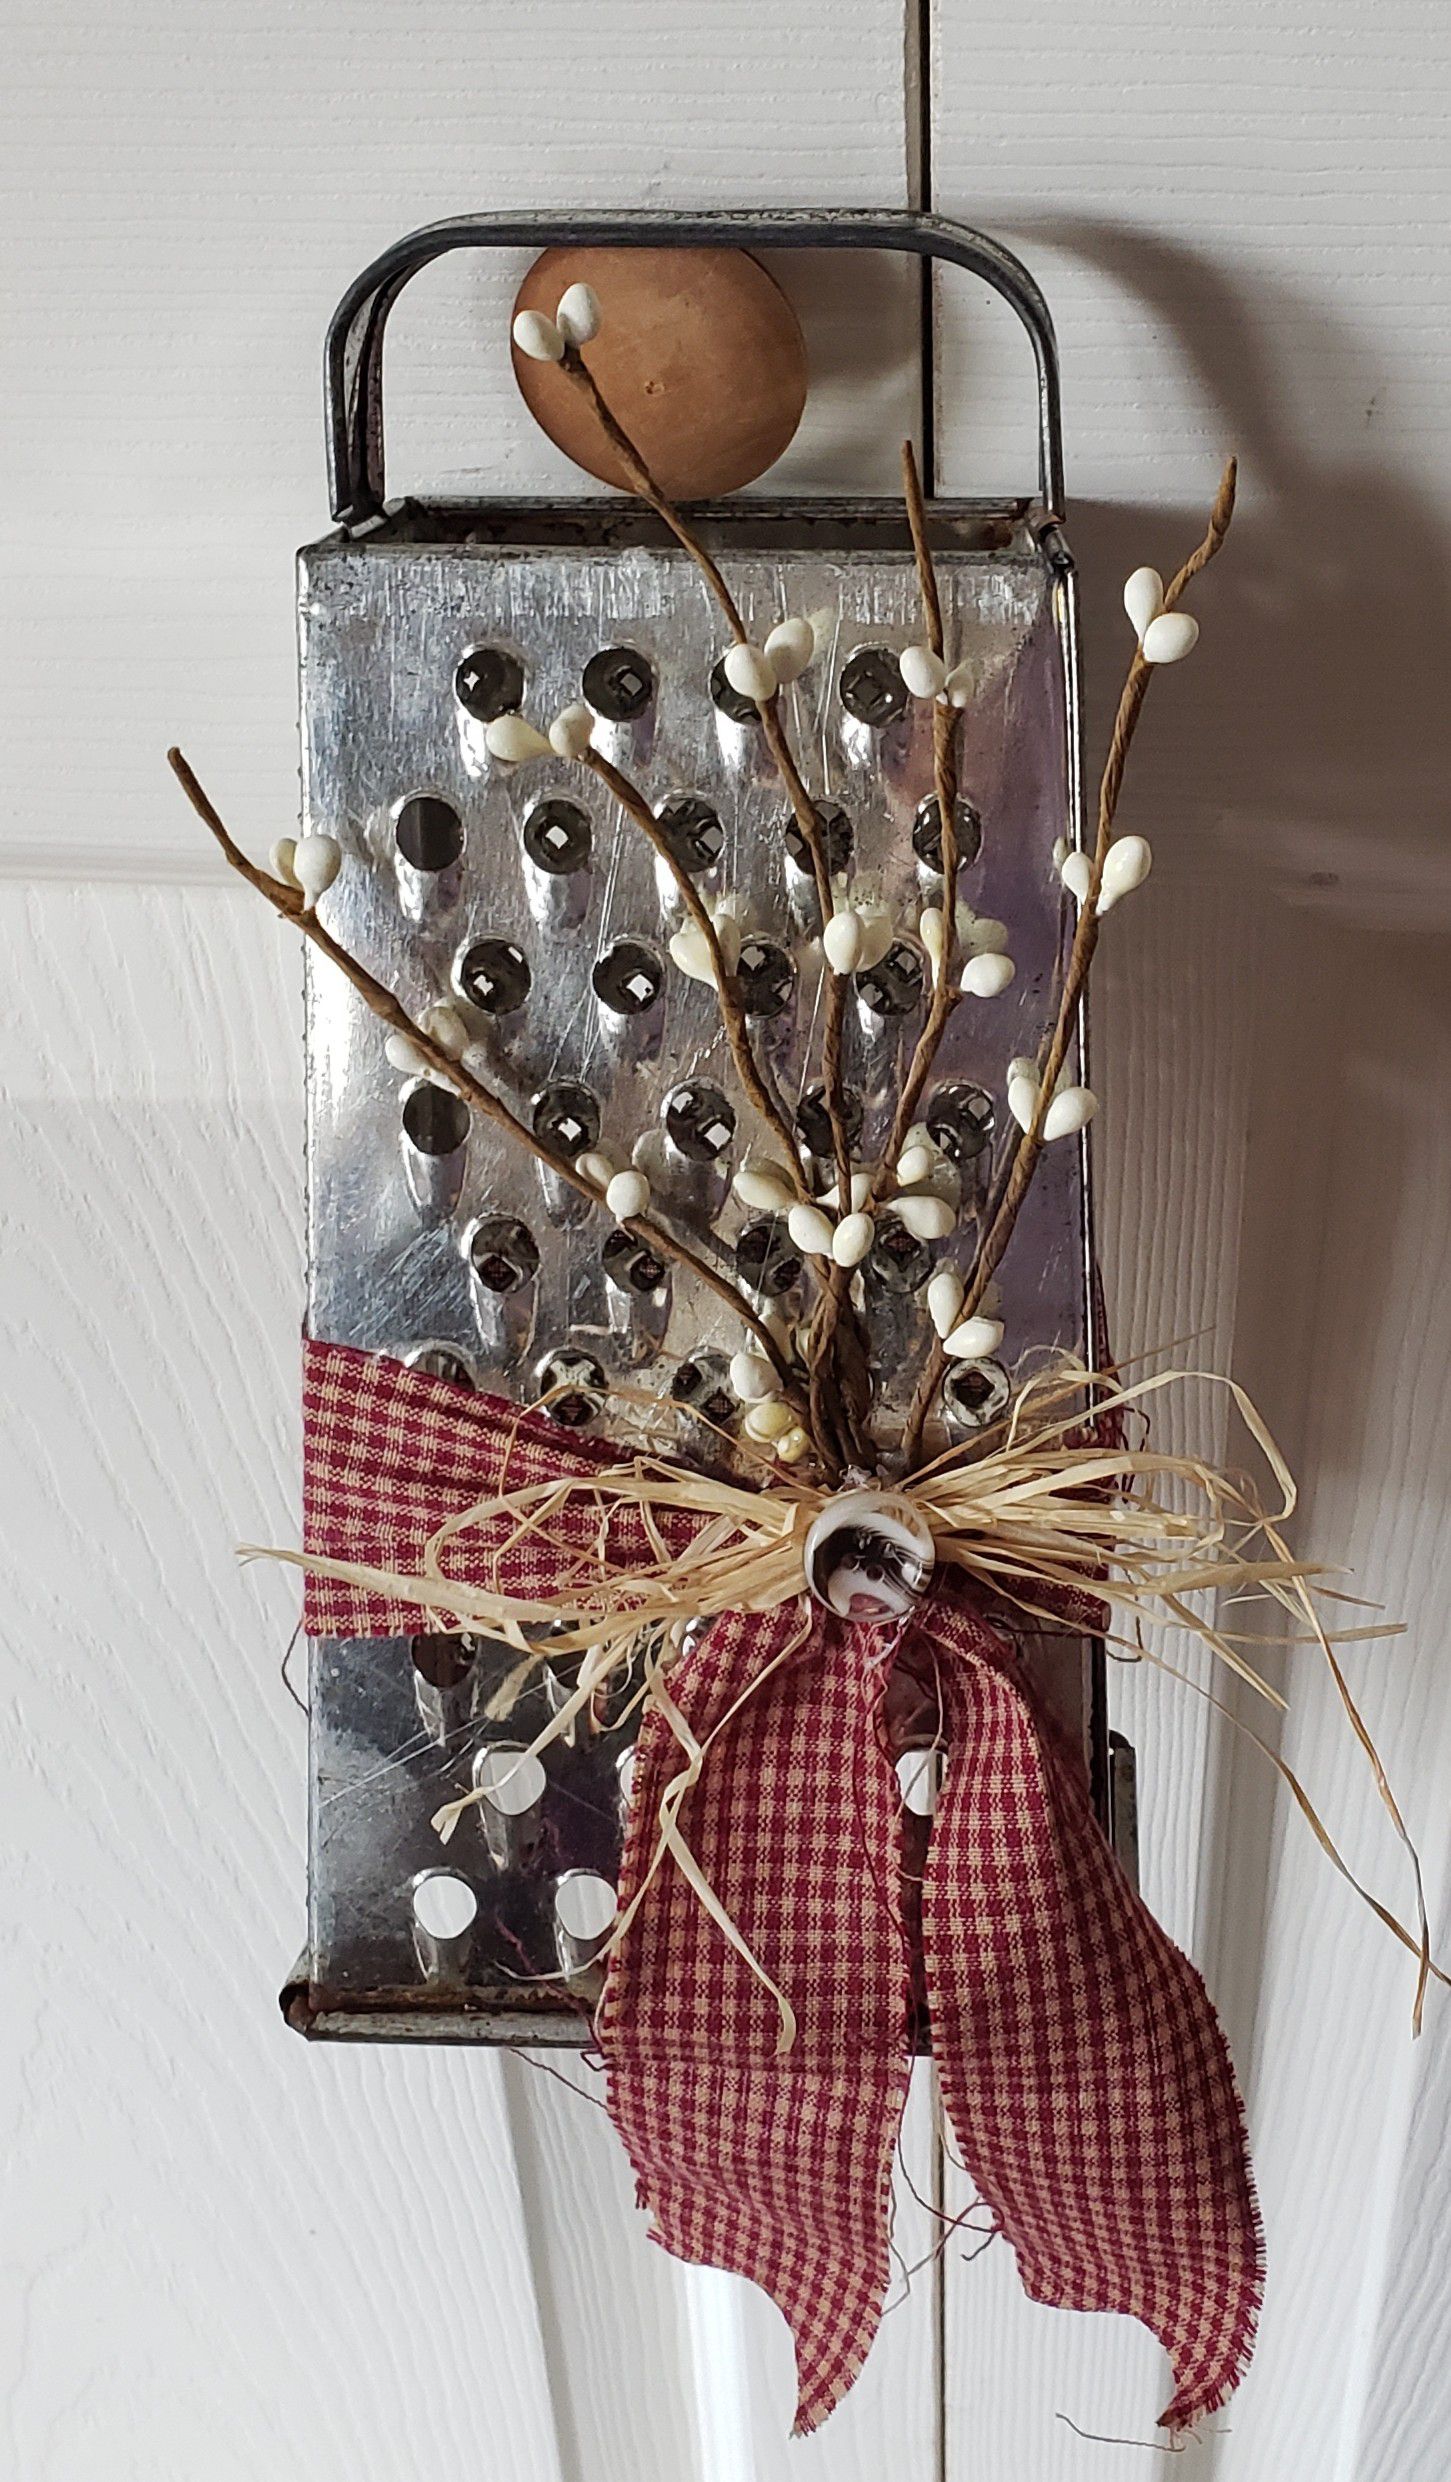 Primmed up grater with pipberries and homespun